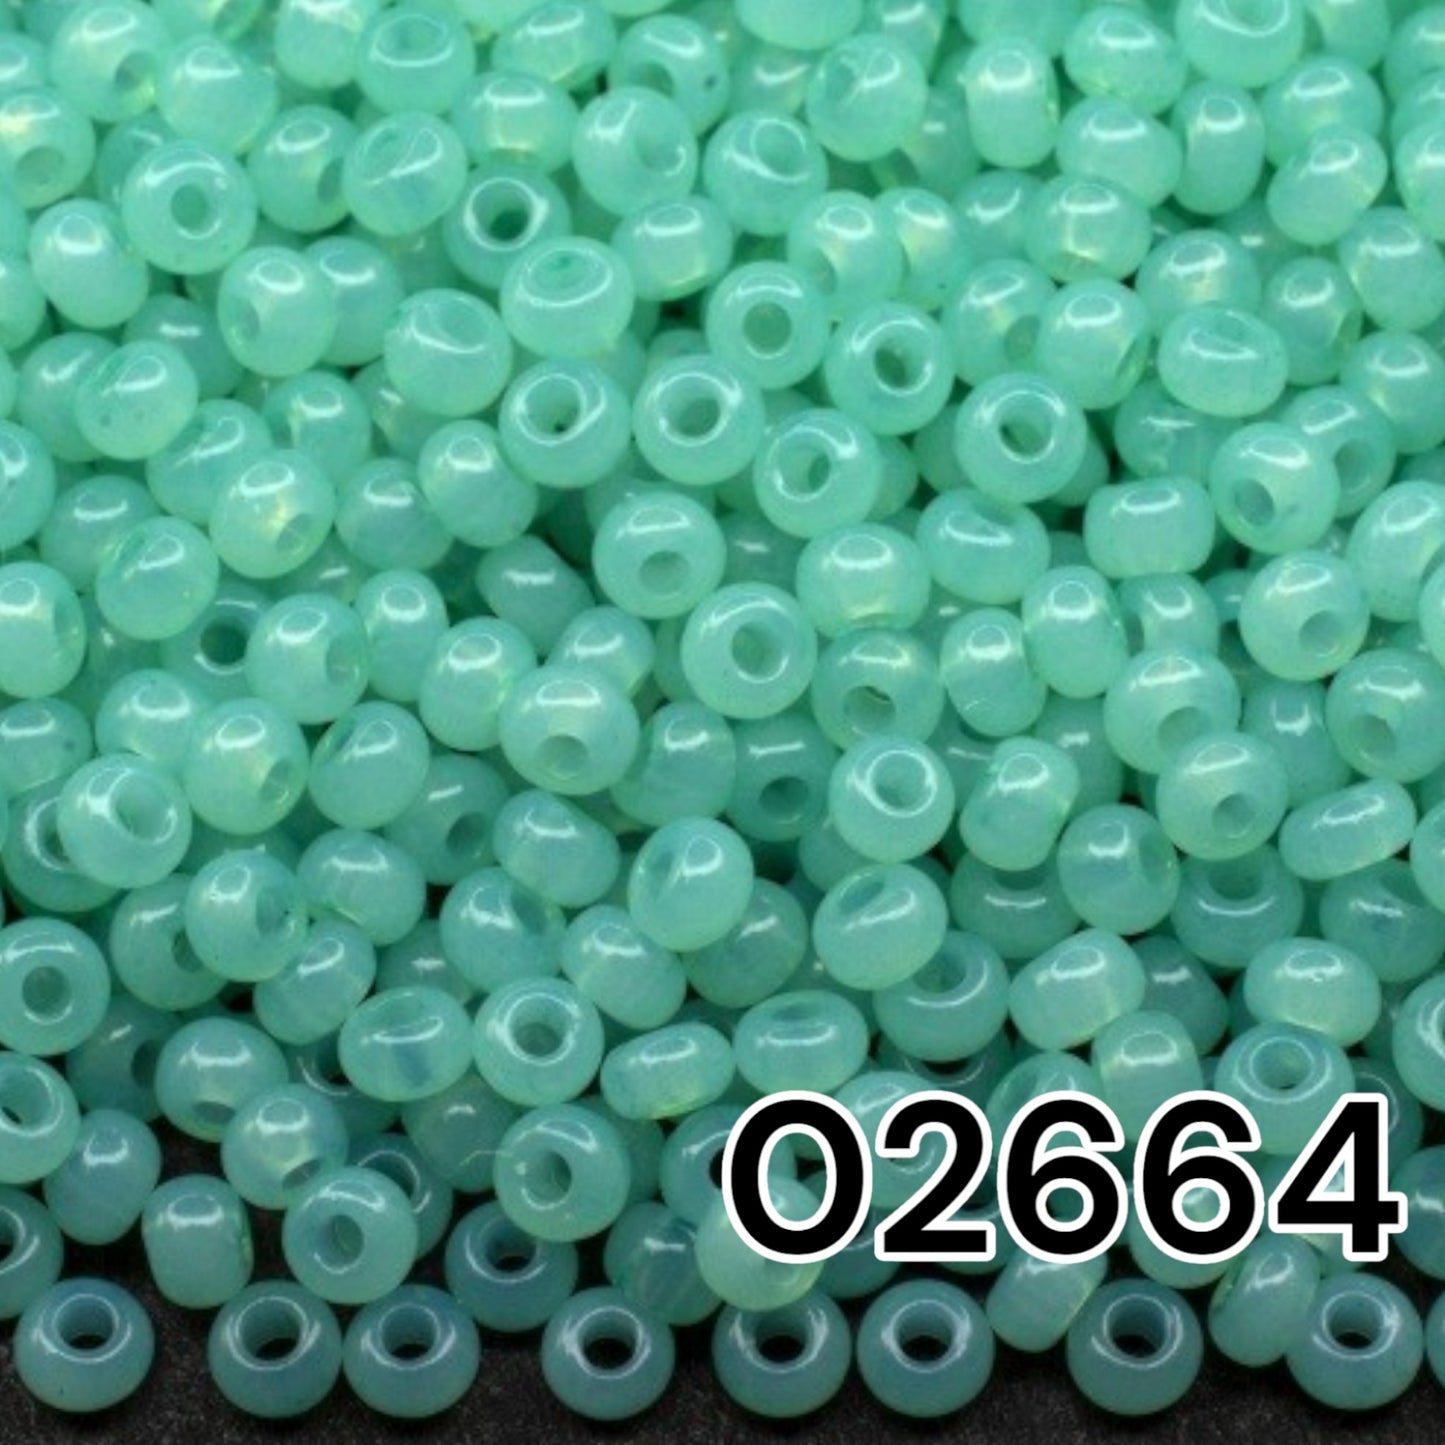 02664 Czech seed beads PRECIOSA round 10/0 turquoise. Alabaster - Solgel Dyed.